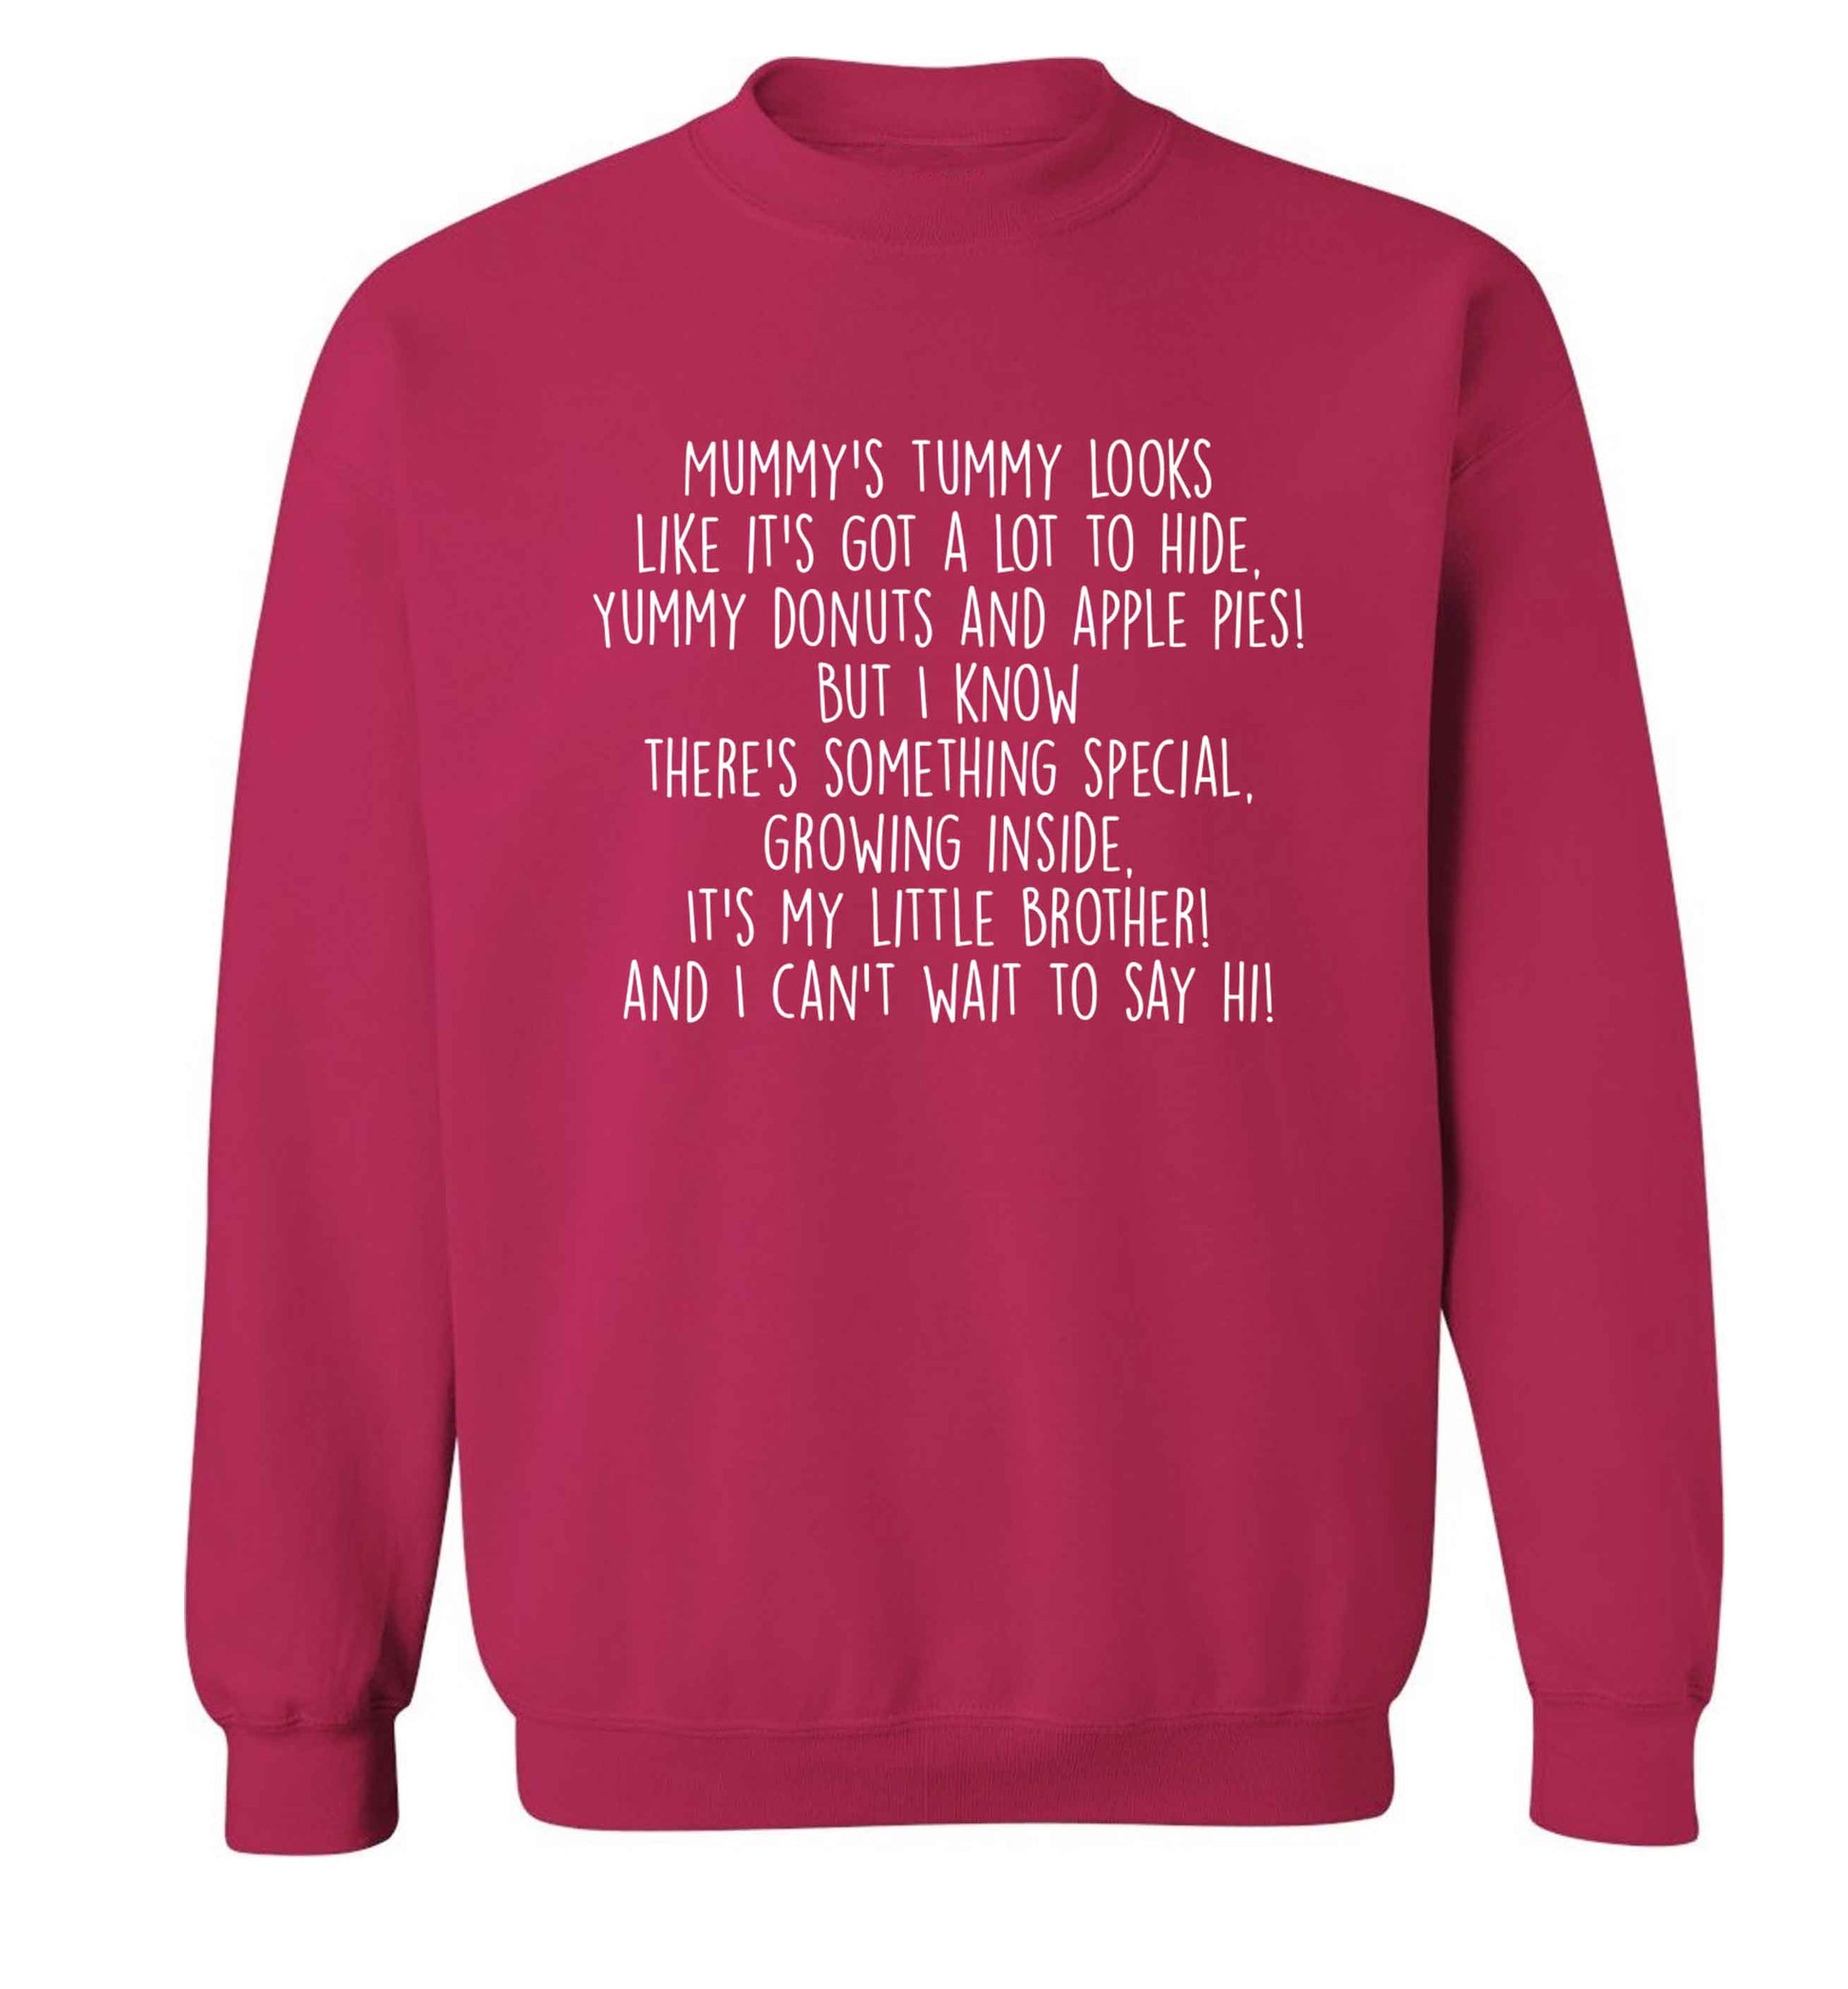 Something special growing inside it's my little brother I can't wait to say hi! Adult's unisex pink Sweater 2XL